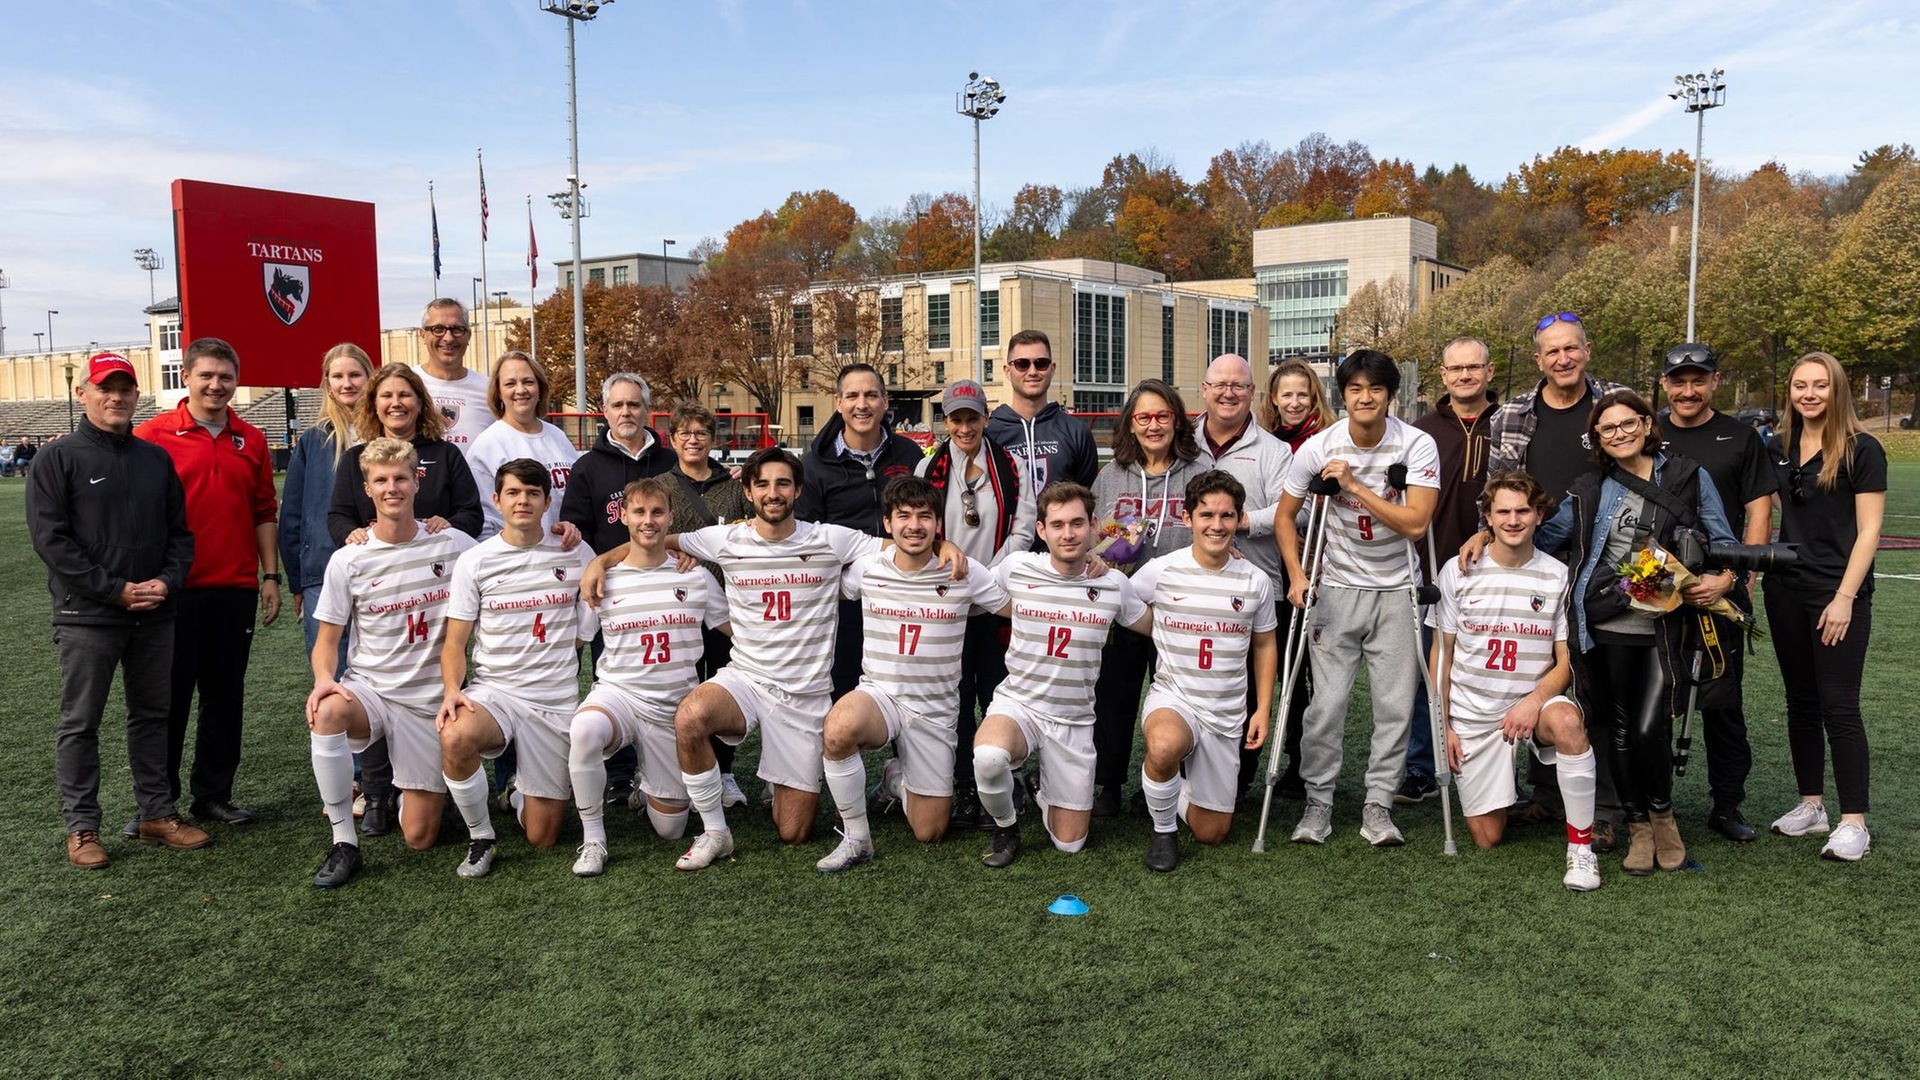 group picture of men's soccer team with families